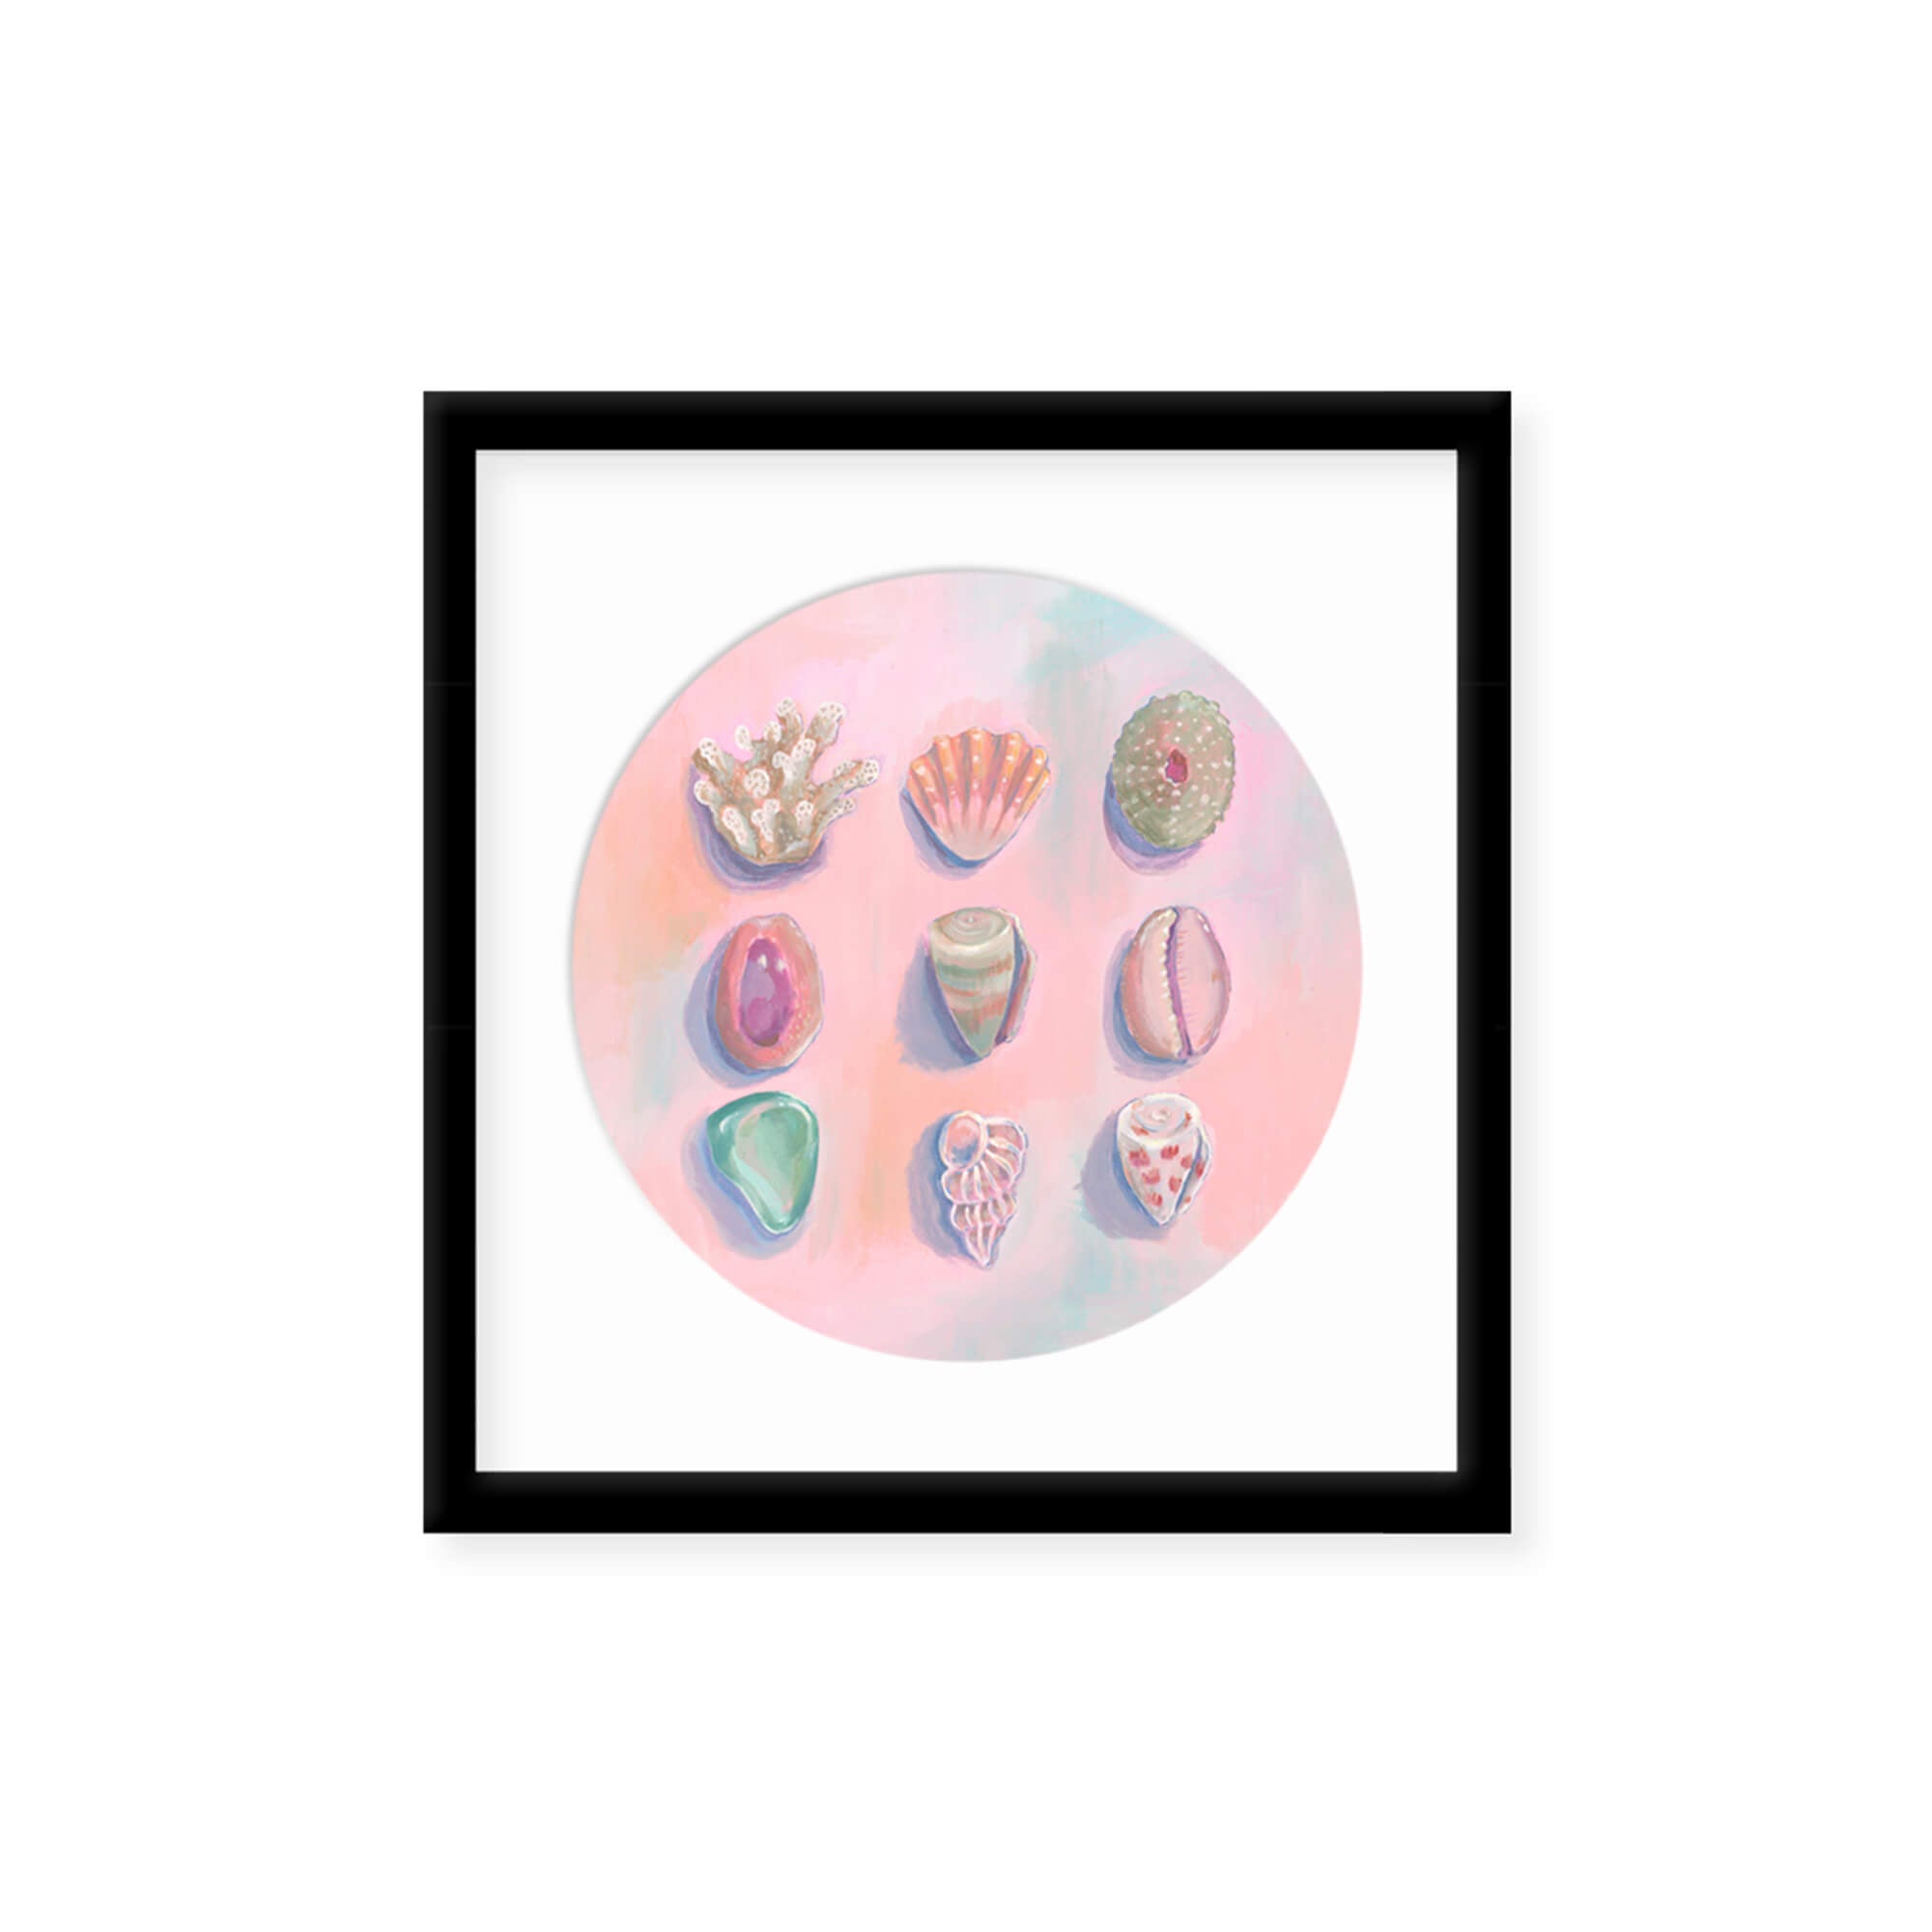 Different kinds of seashells with pastels hues by Hawaii artist Lindsay Wilkins